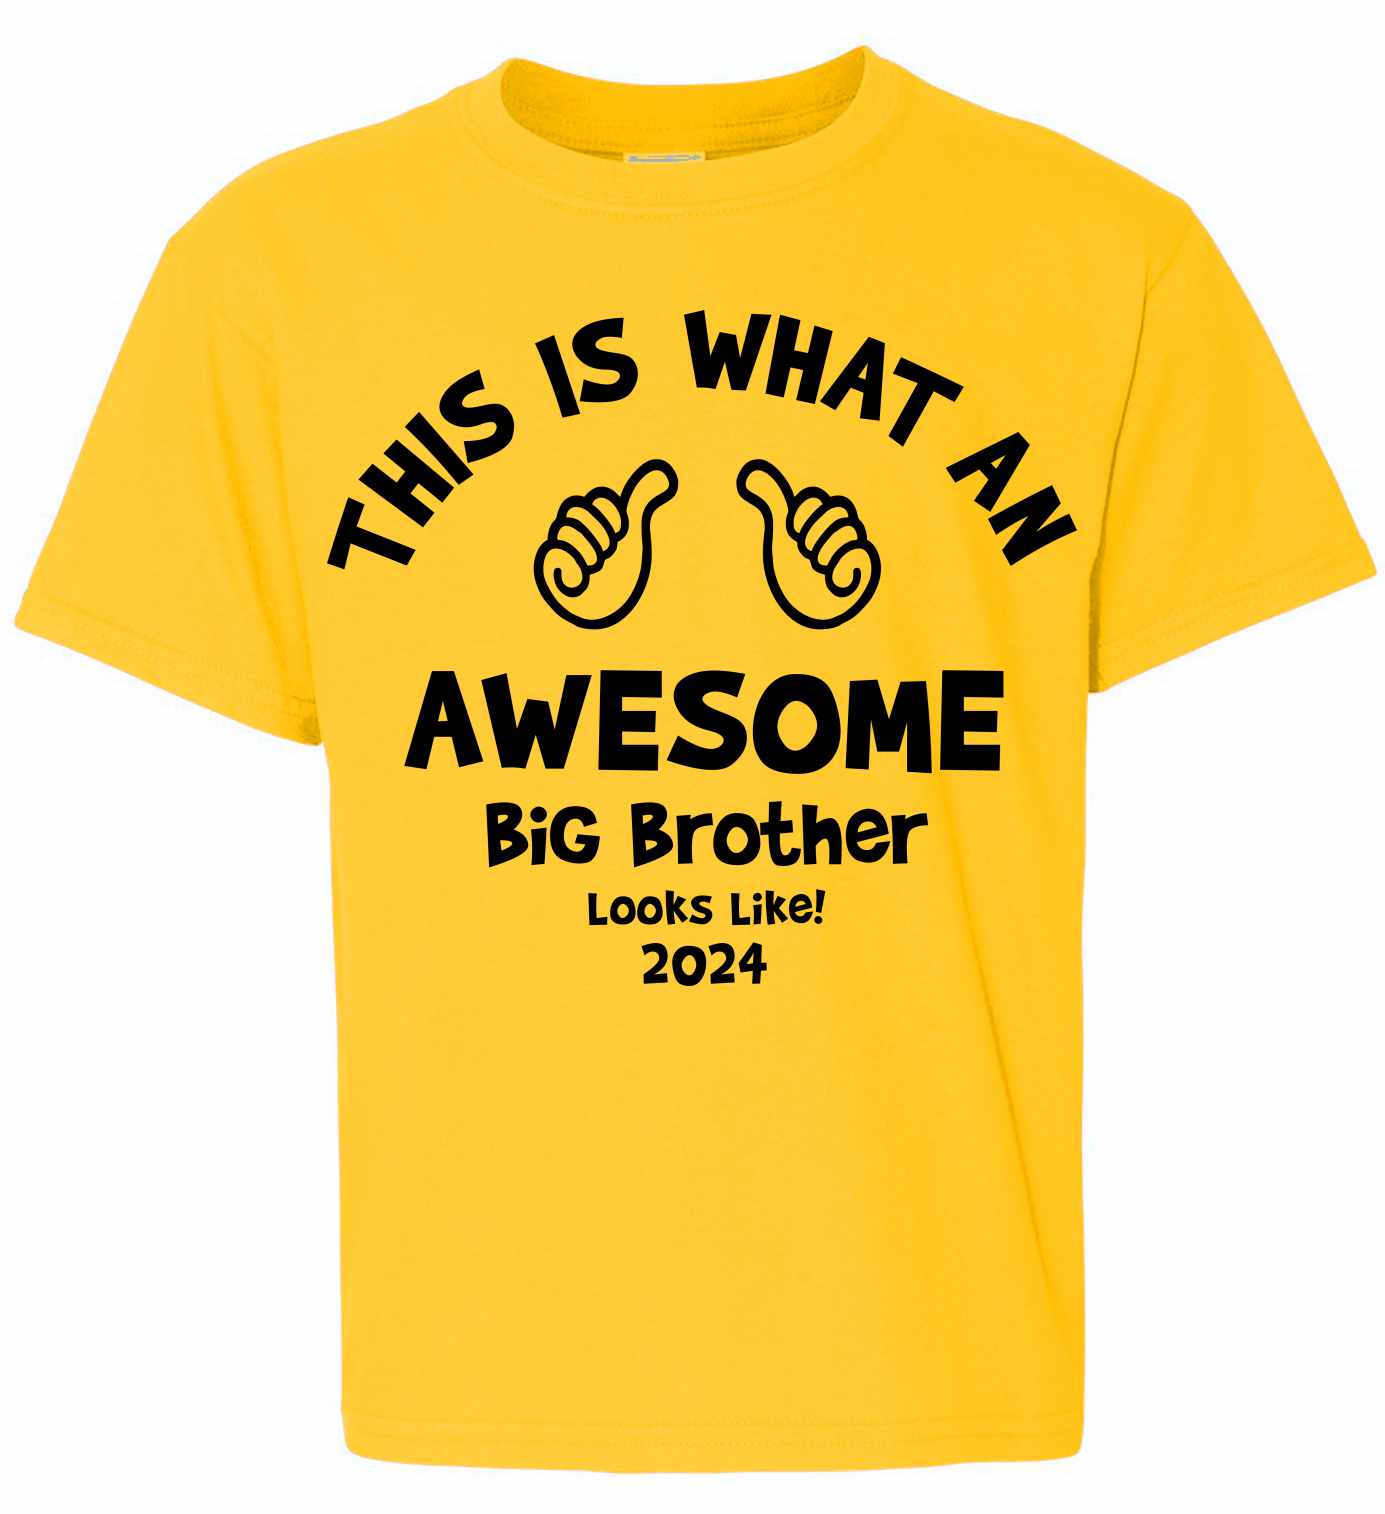 Awesome Big Brother in 2024 on Kids T-Shirt (#1363-201)